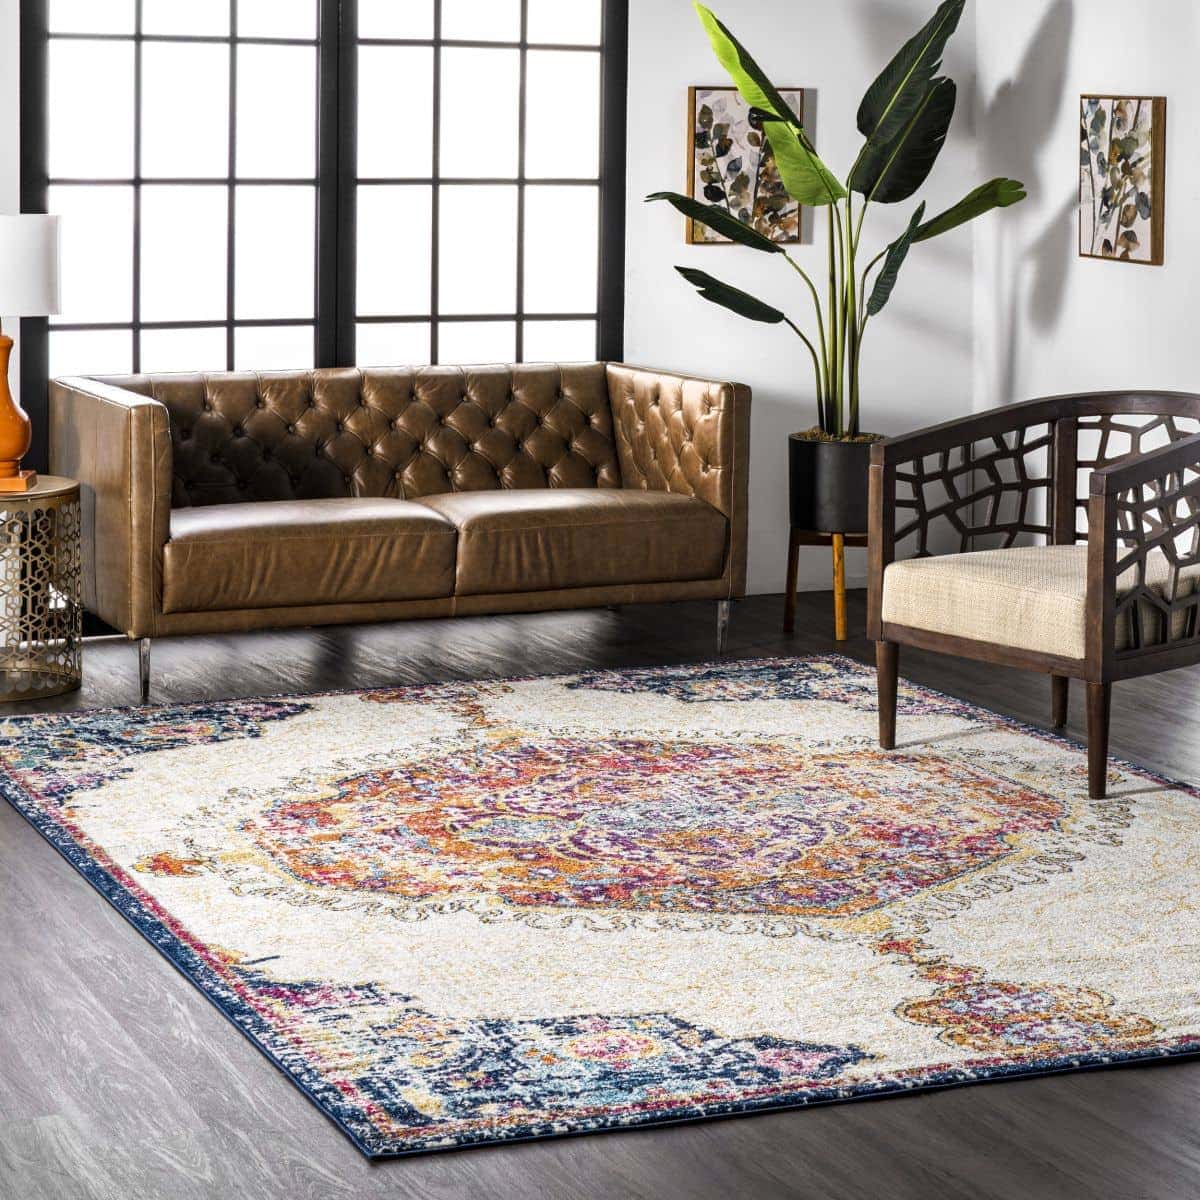 25 Gorgeous Rugs That Go With Brown Couches, Grey Rug Brown Sofa